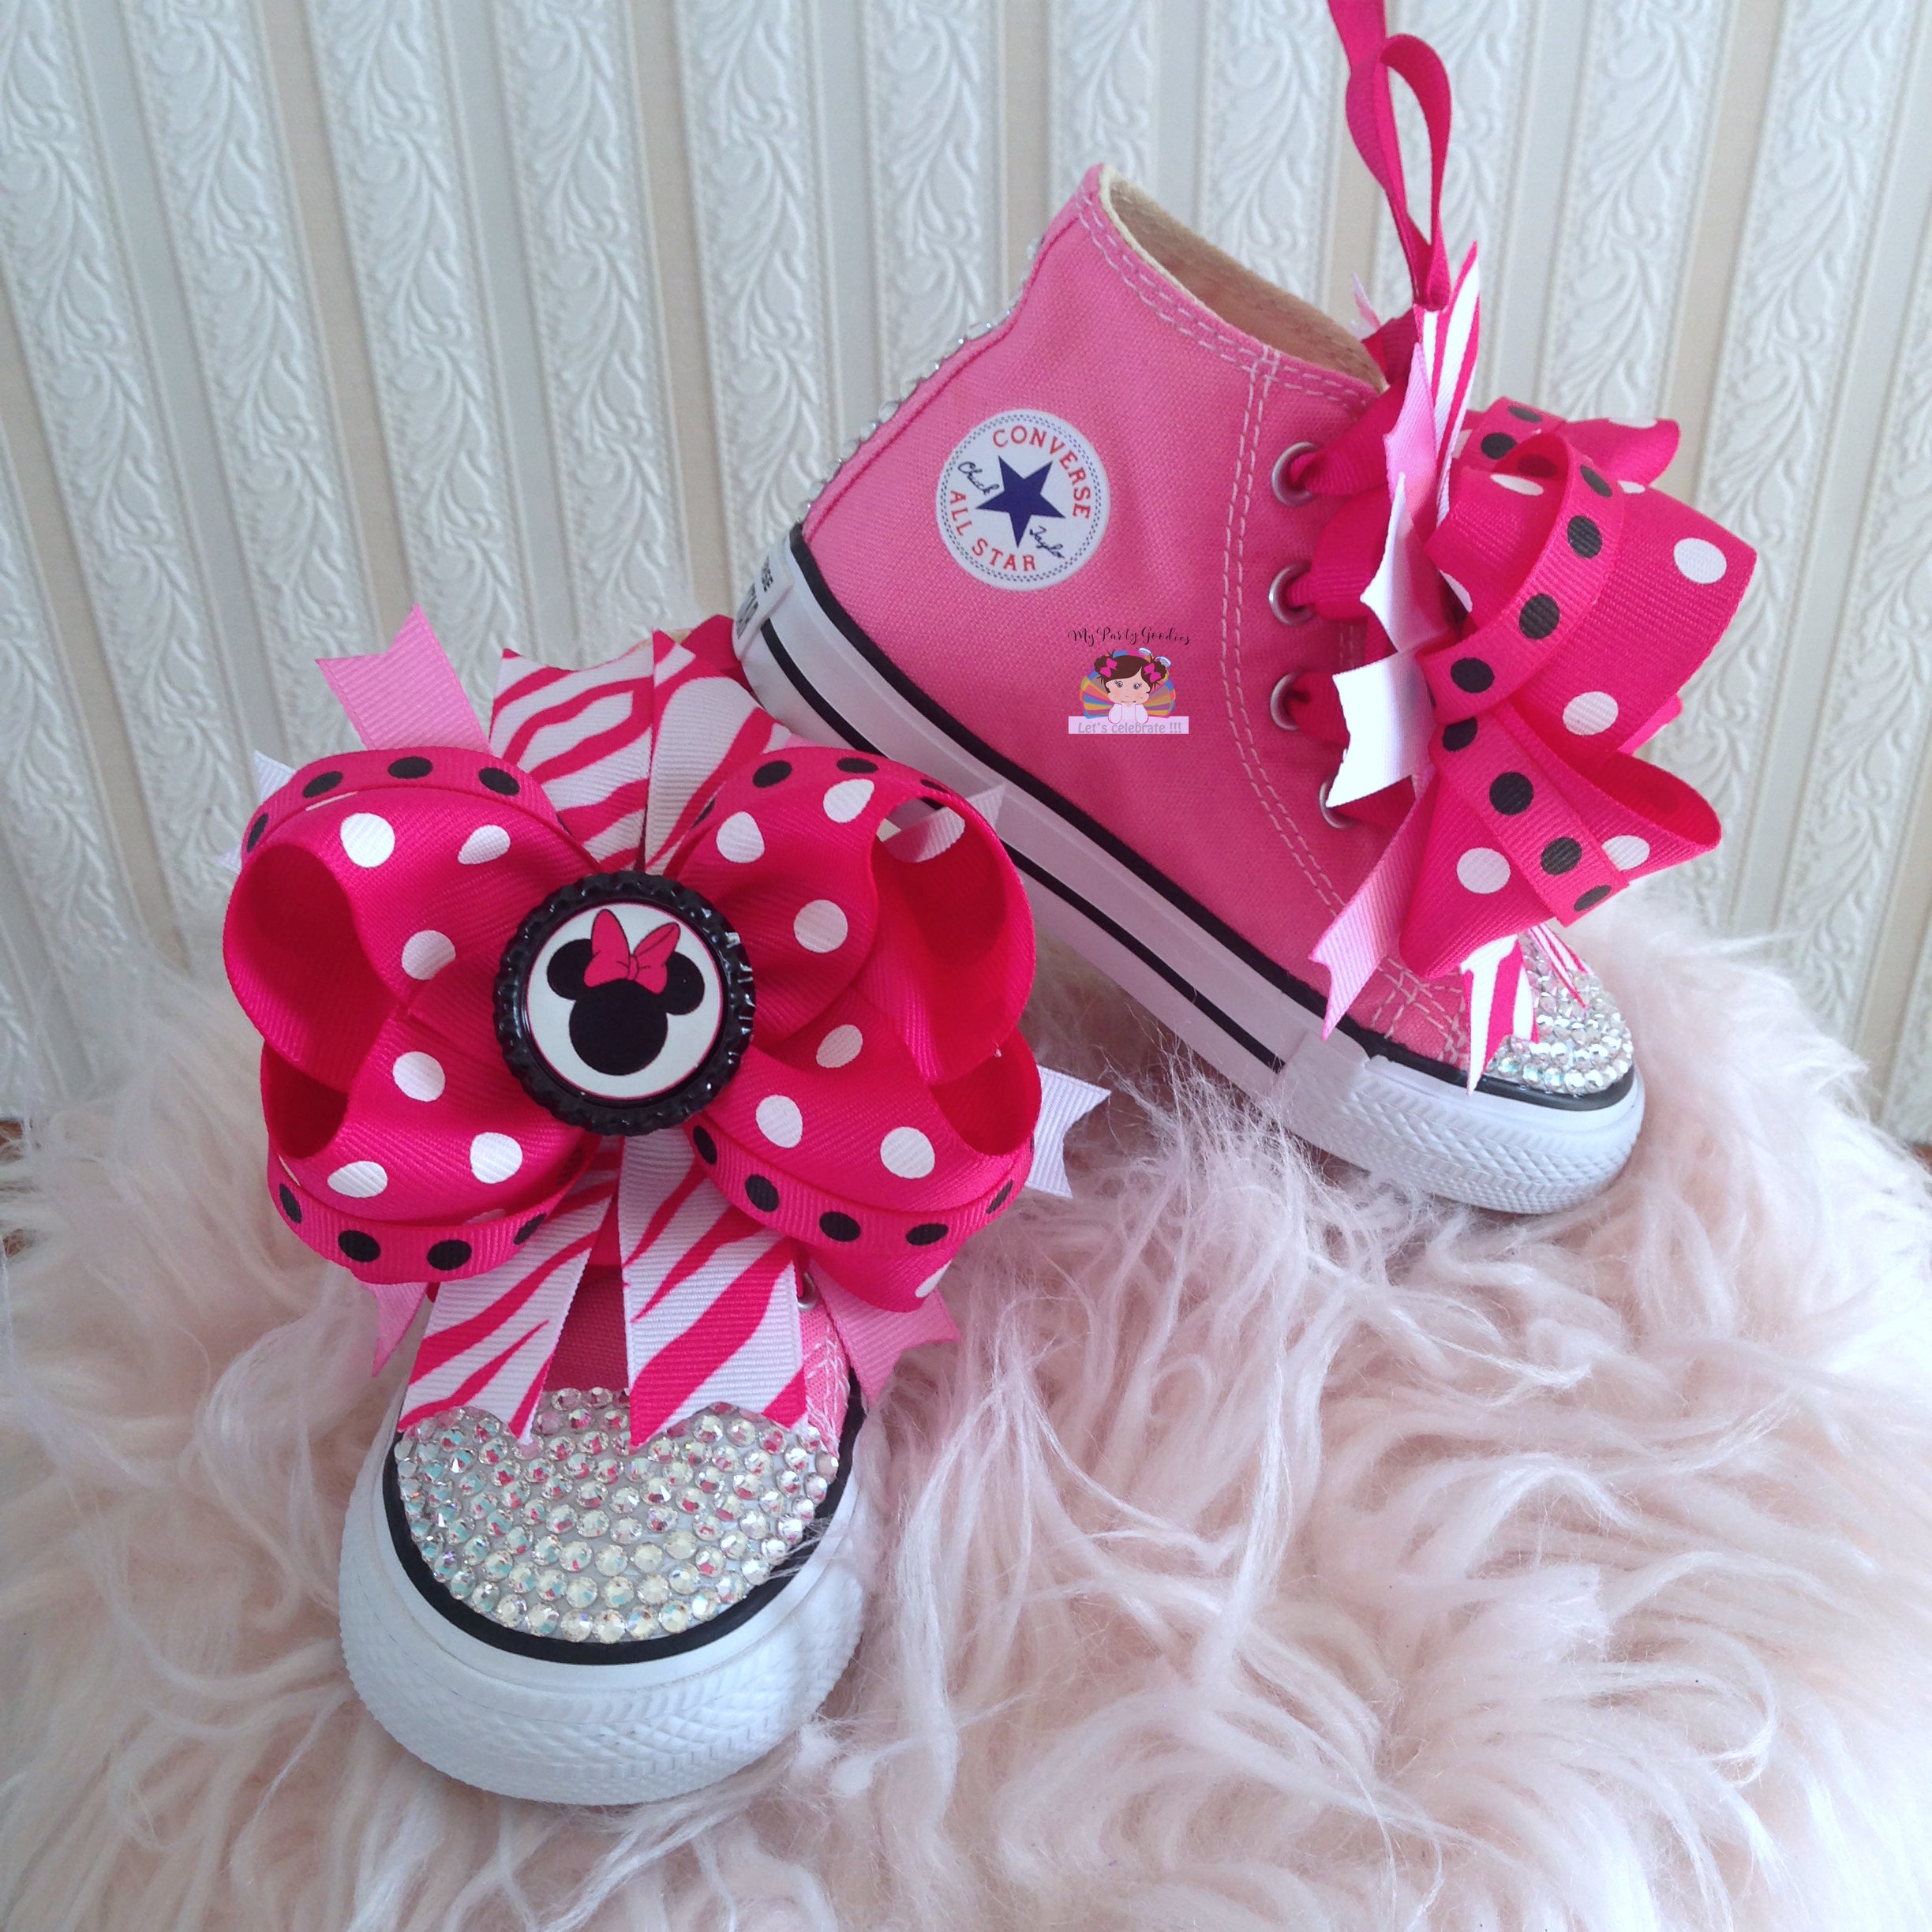 minnie mouse birthday shoes